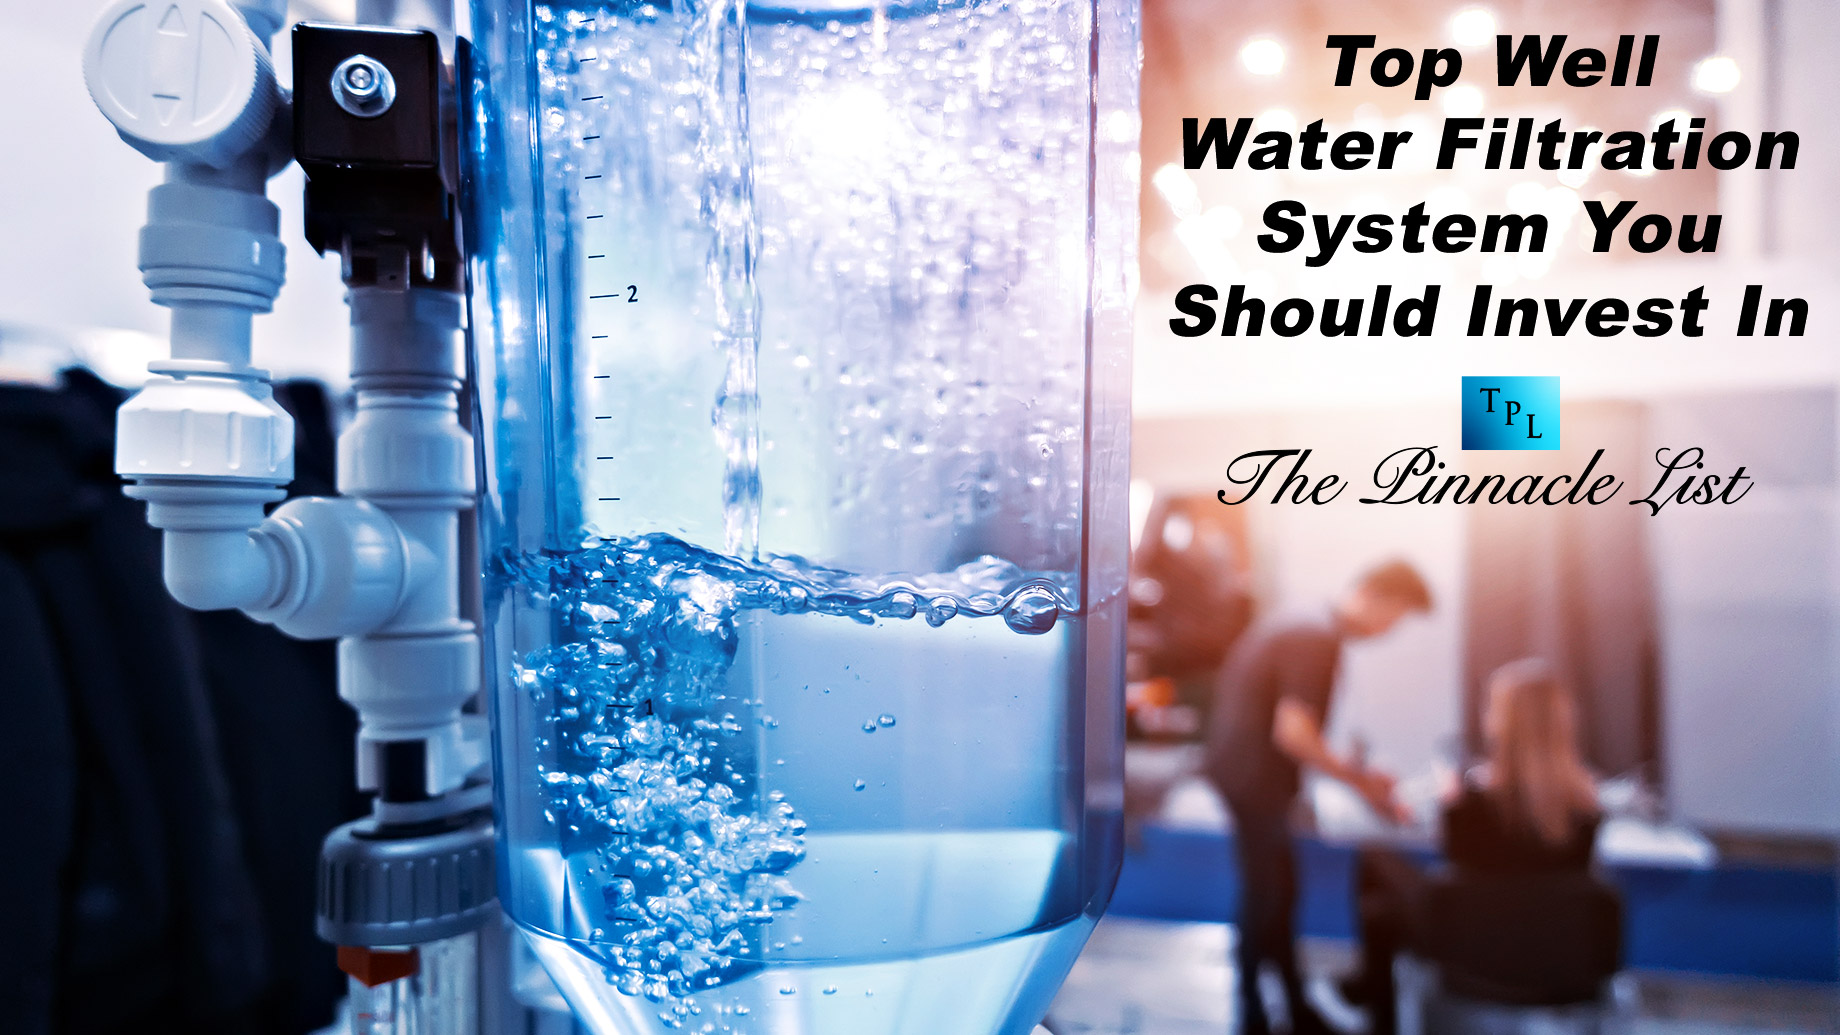 Top Well Water Filtration System You Should Invest In